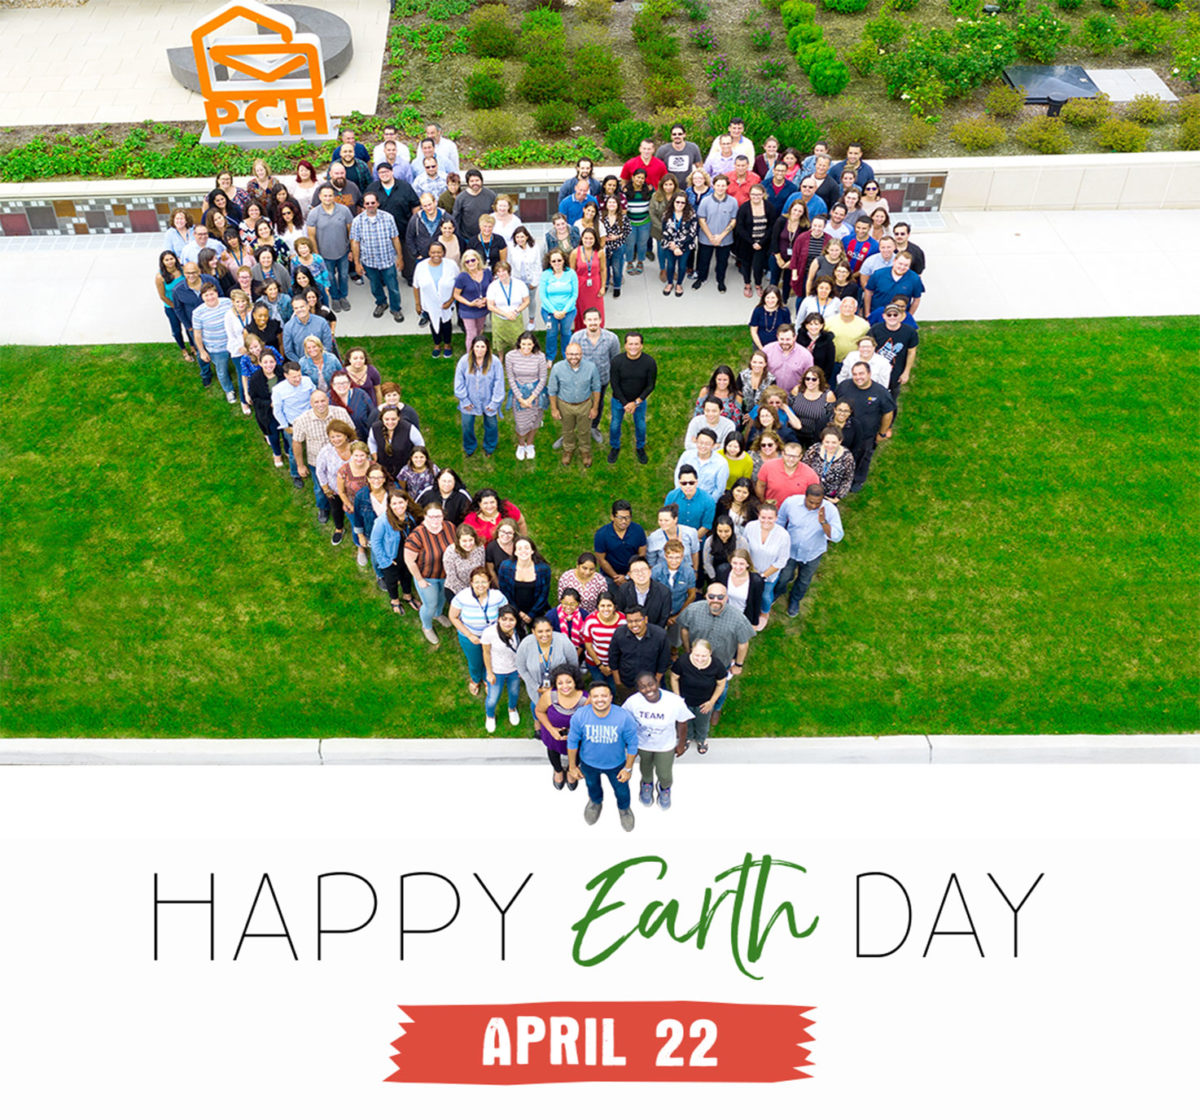 HAPPY EARTH DAY FROM PCH AND OUR SOCIAL RESPONSIBILITY TEAM!